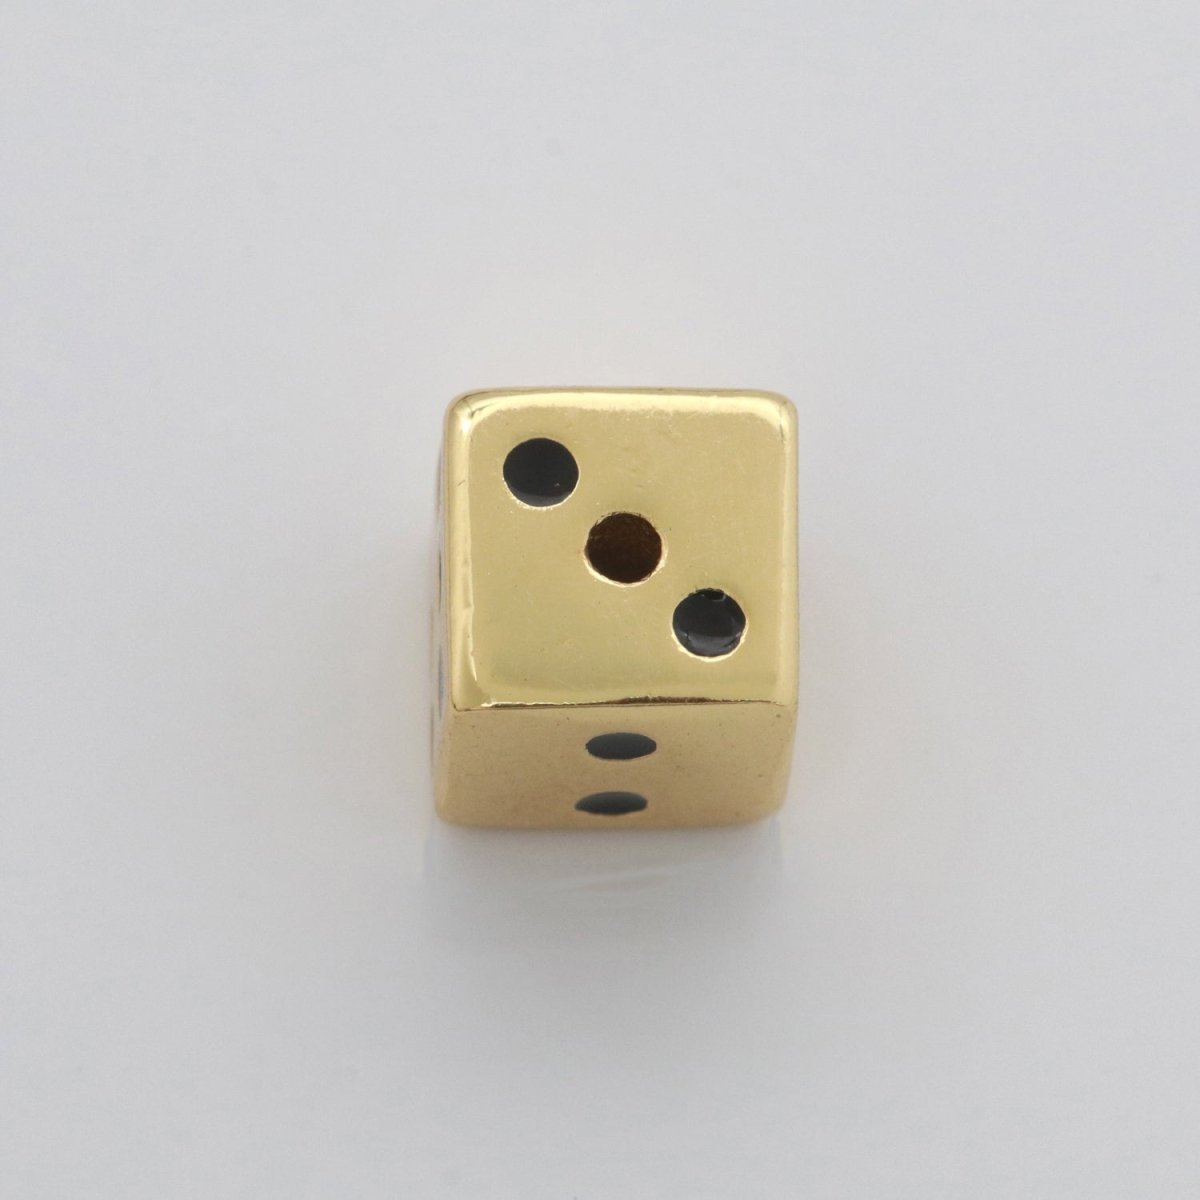 Gold Lucky Dice Beads Spacer Beads, for DIY Jewelry Making Spacer Charms Beaded Bracelet, Bead Size 8, 10mm Hole 2mm B-632 B-633 - DLUXCA